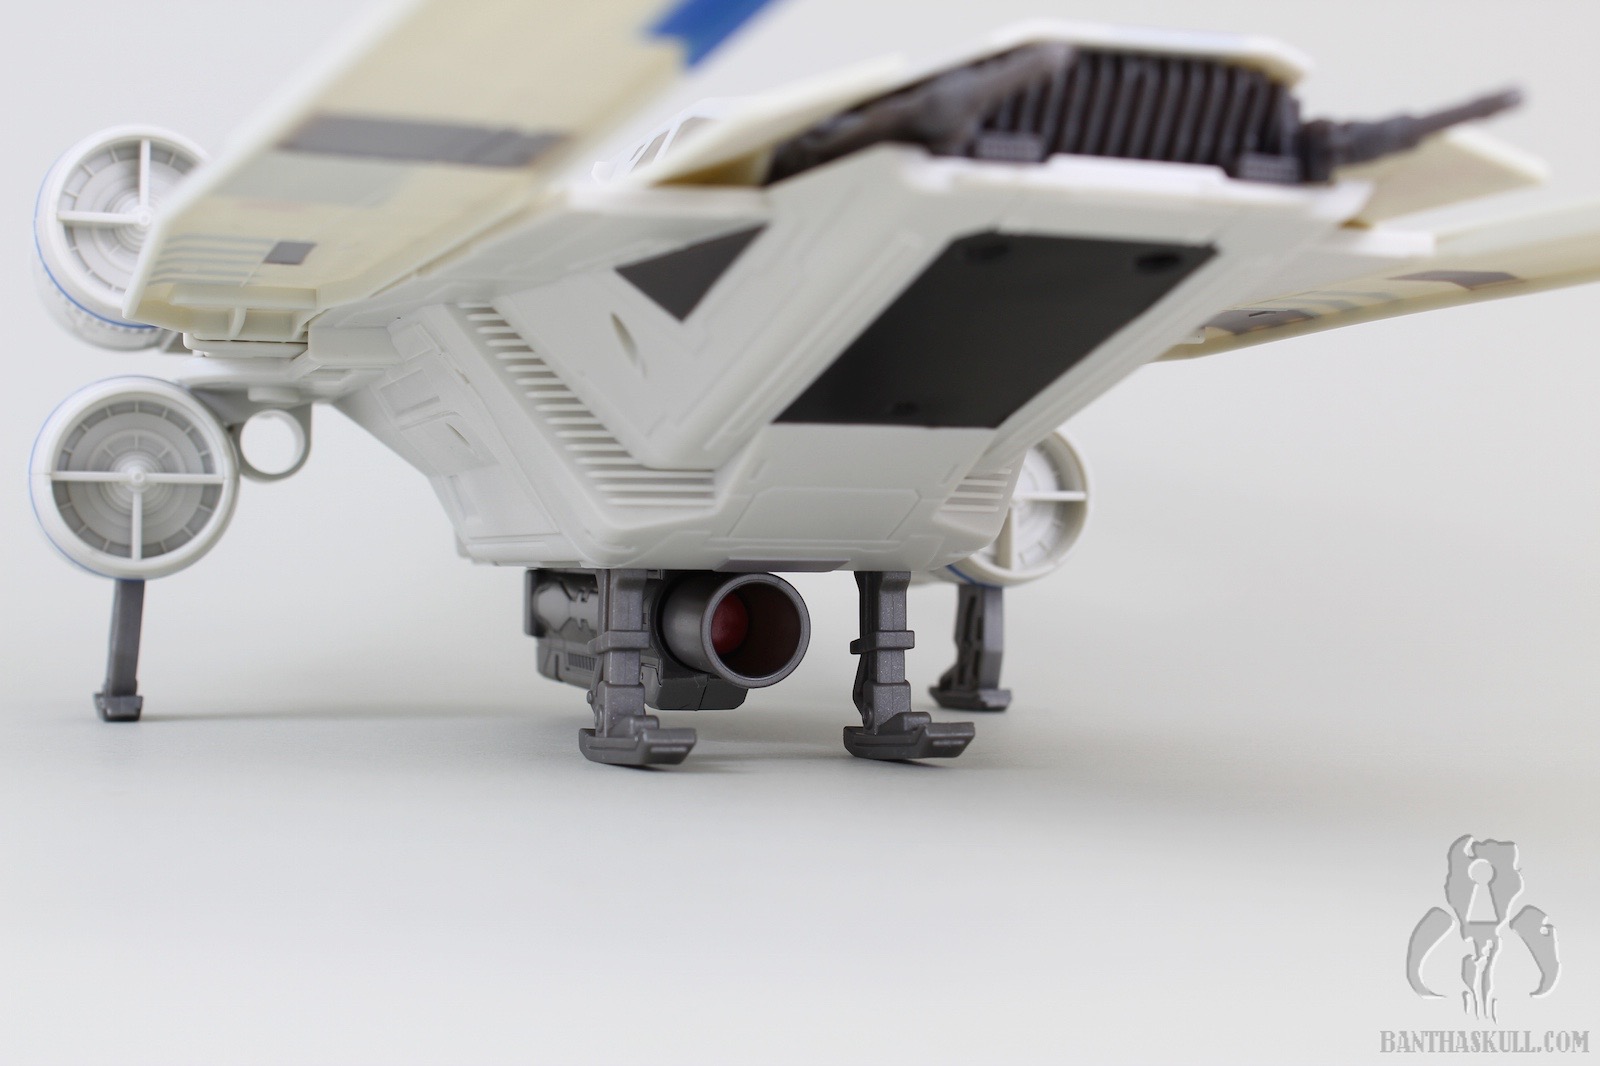 REVIEW AND PHOTO GALLERY: Star Wars Rogue One RO - Rebel U-Wing Fighter 2016